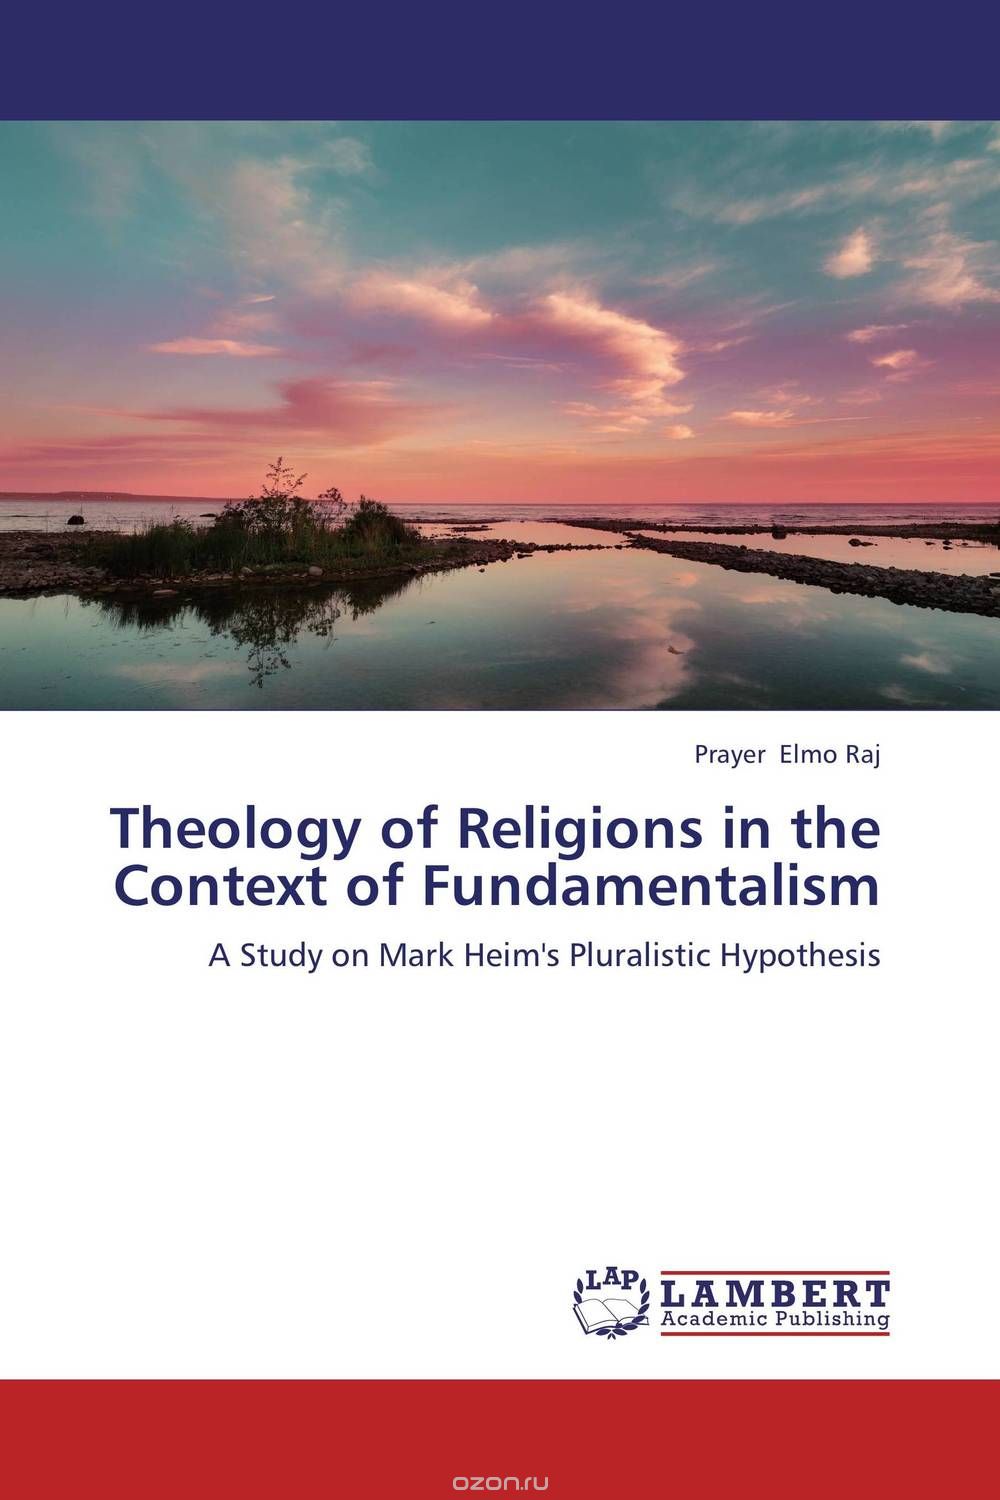 Theology of Religions in the Context of Fundamentalism